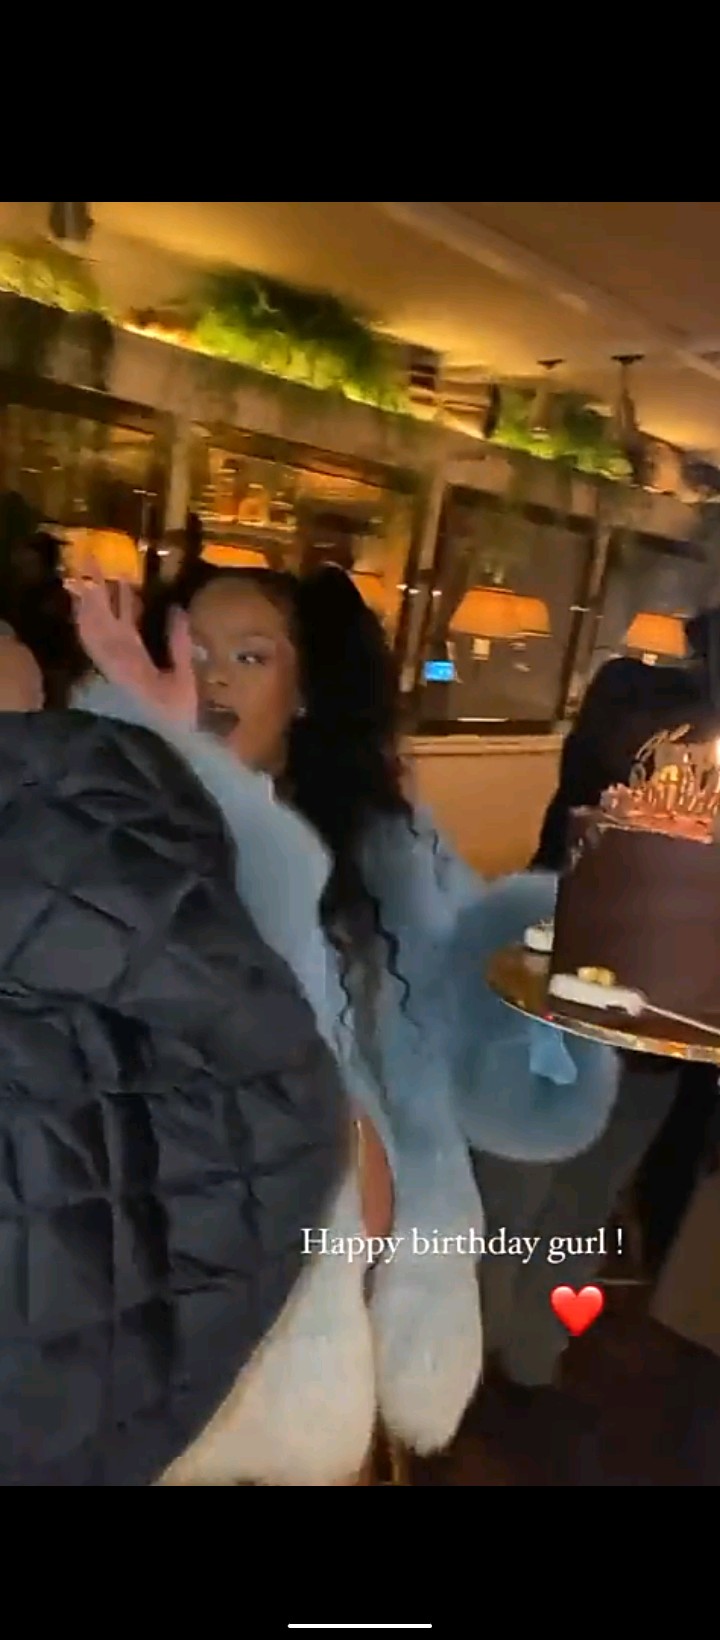 Pregnant Rihanna shows her baby bump in blue fur coat as she celebrates her 34th birthday